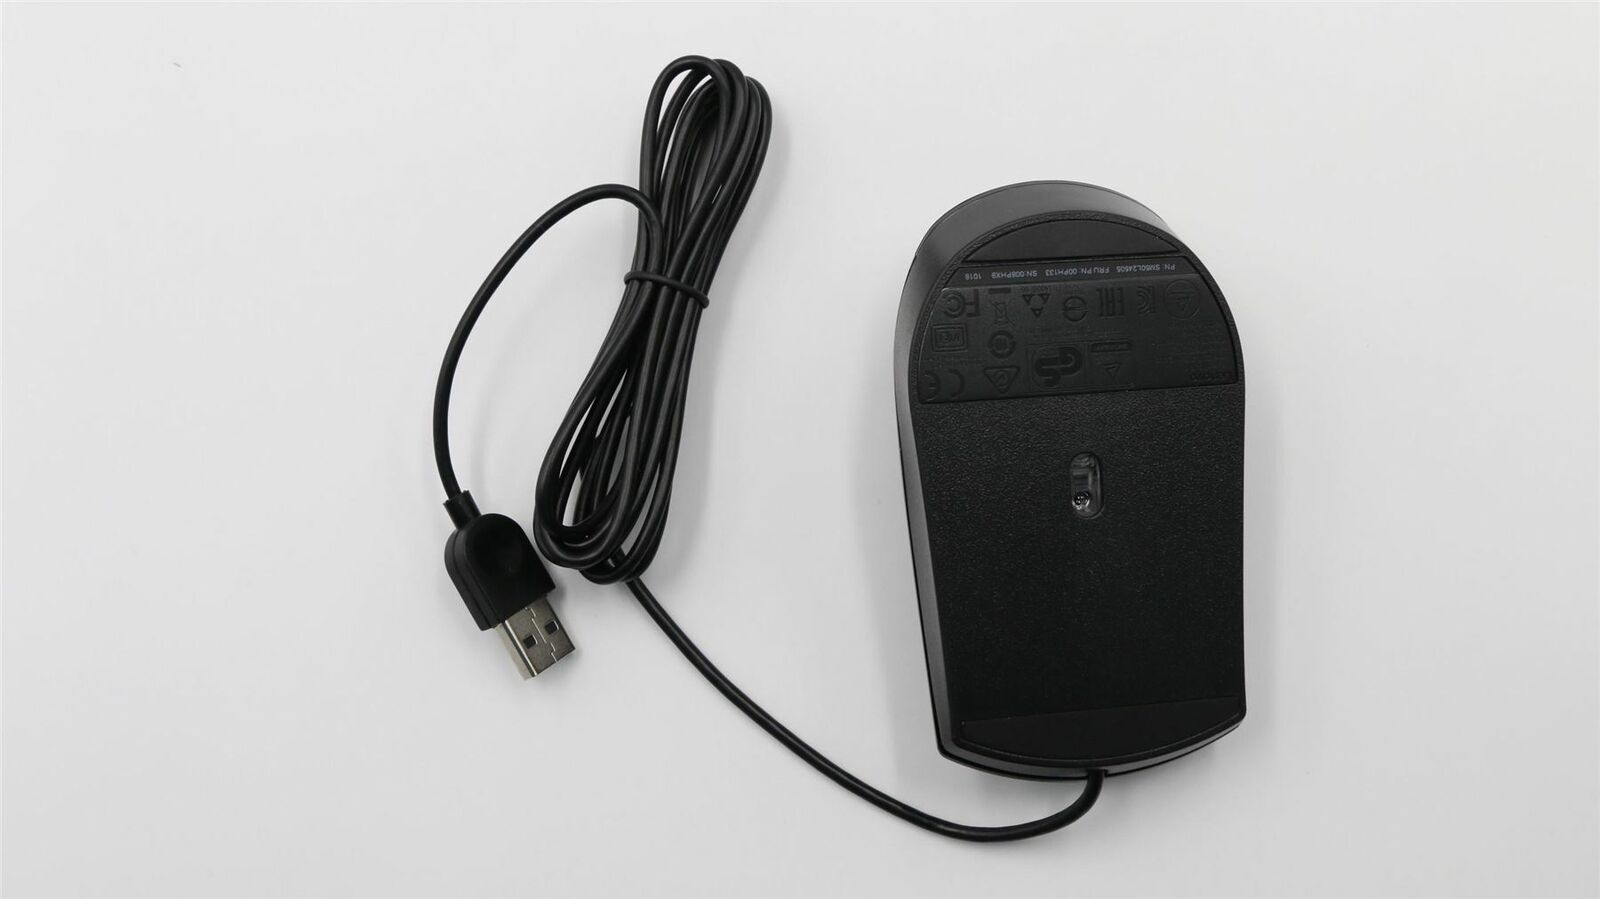 Lenovo M120 Wired Mouse